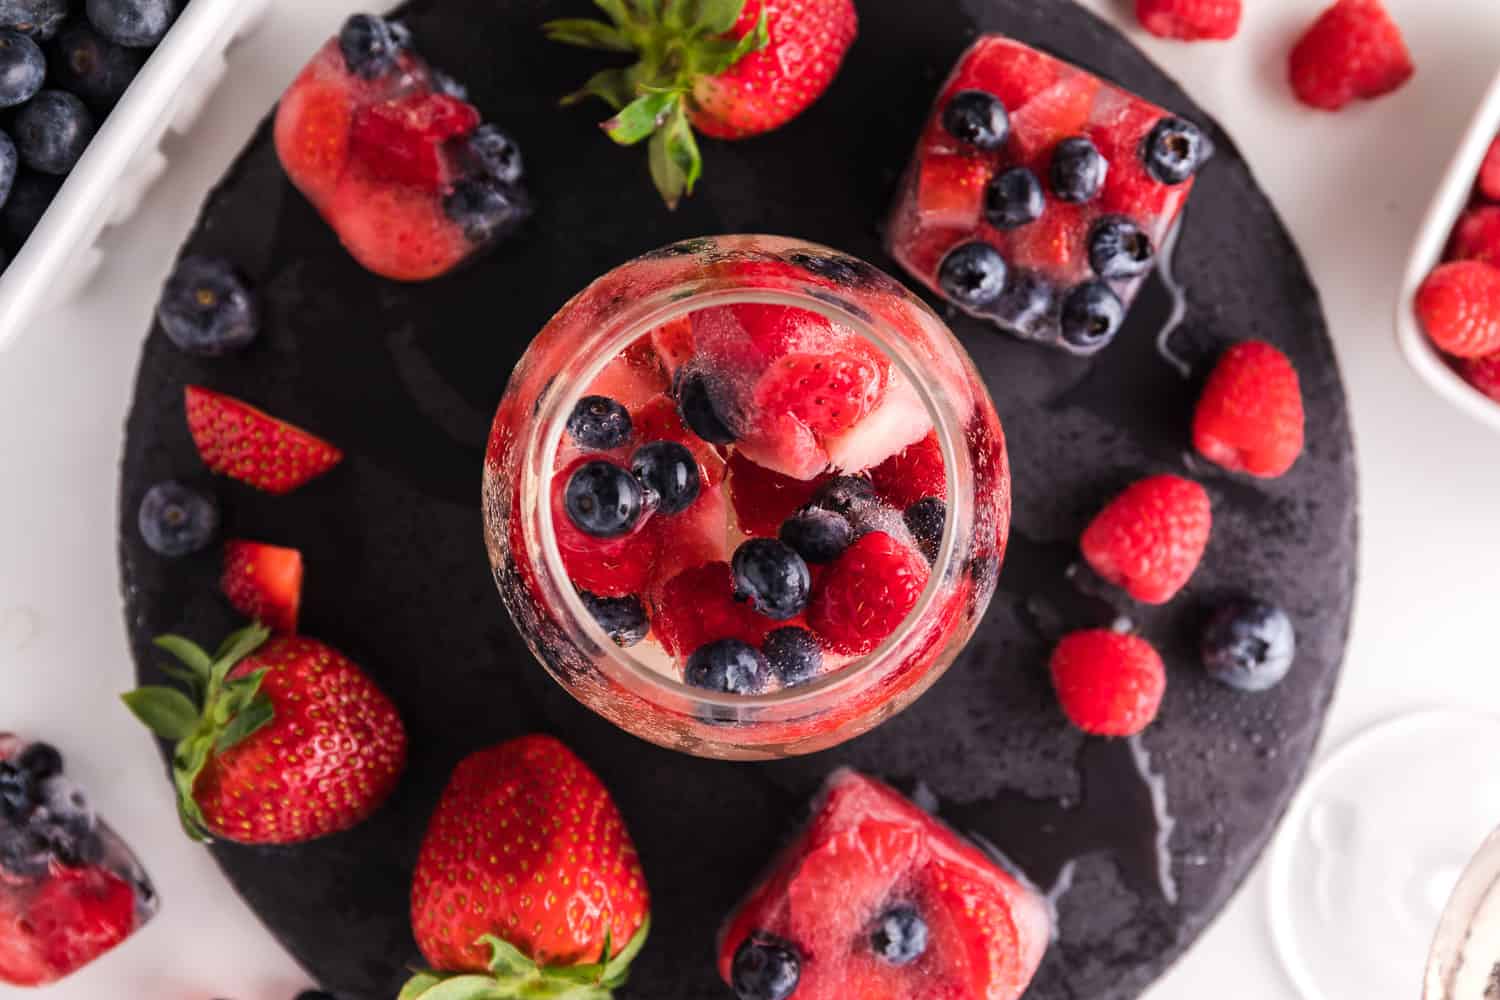 Spritzer surrounded by berries and ice cubes.